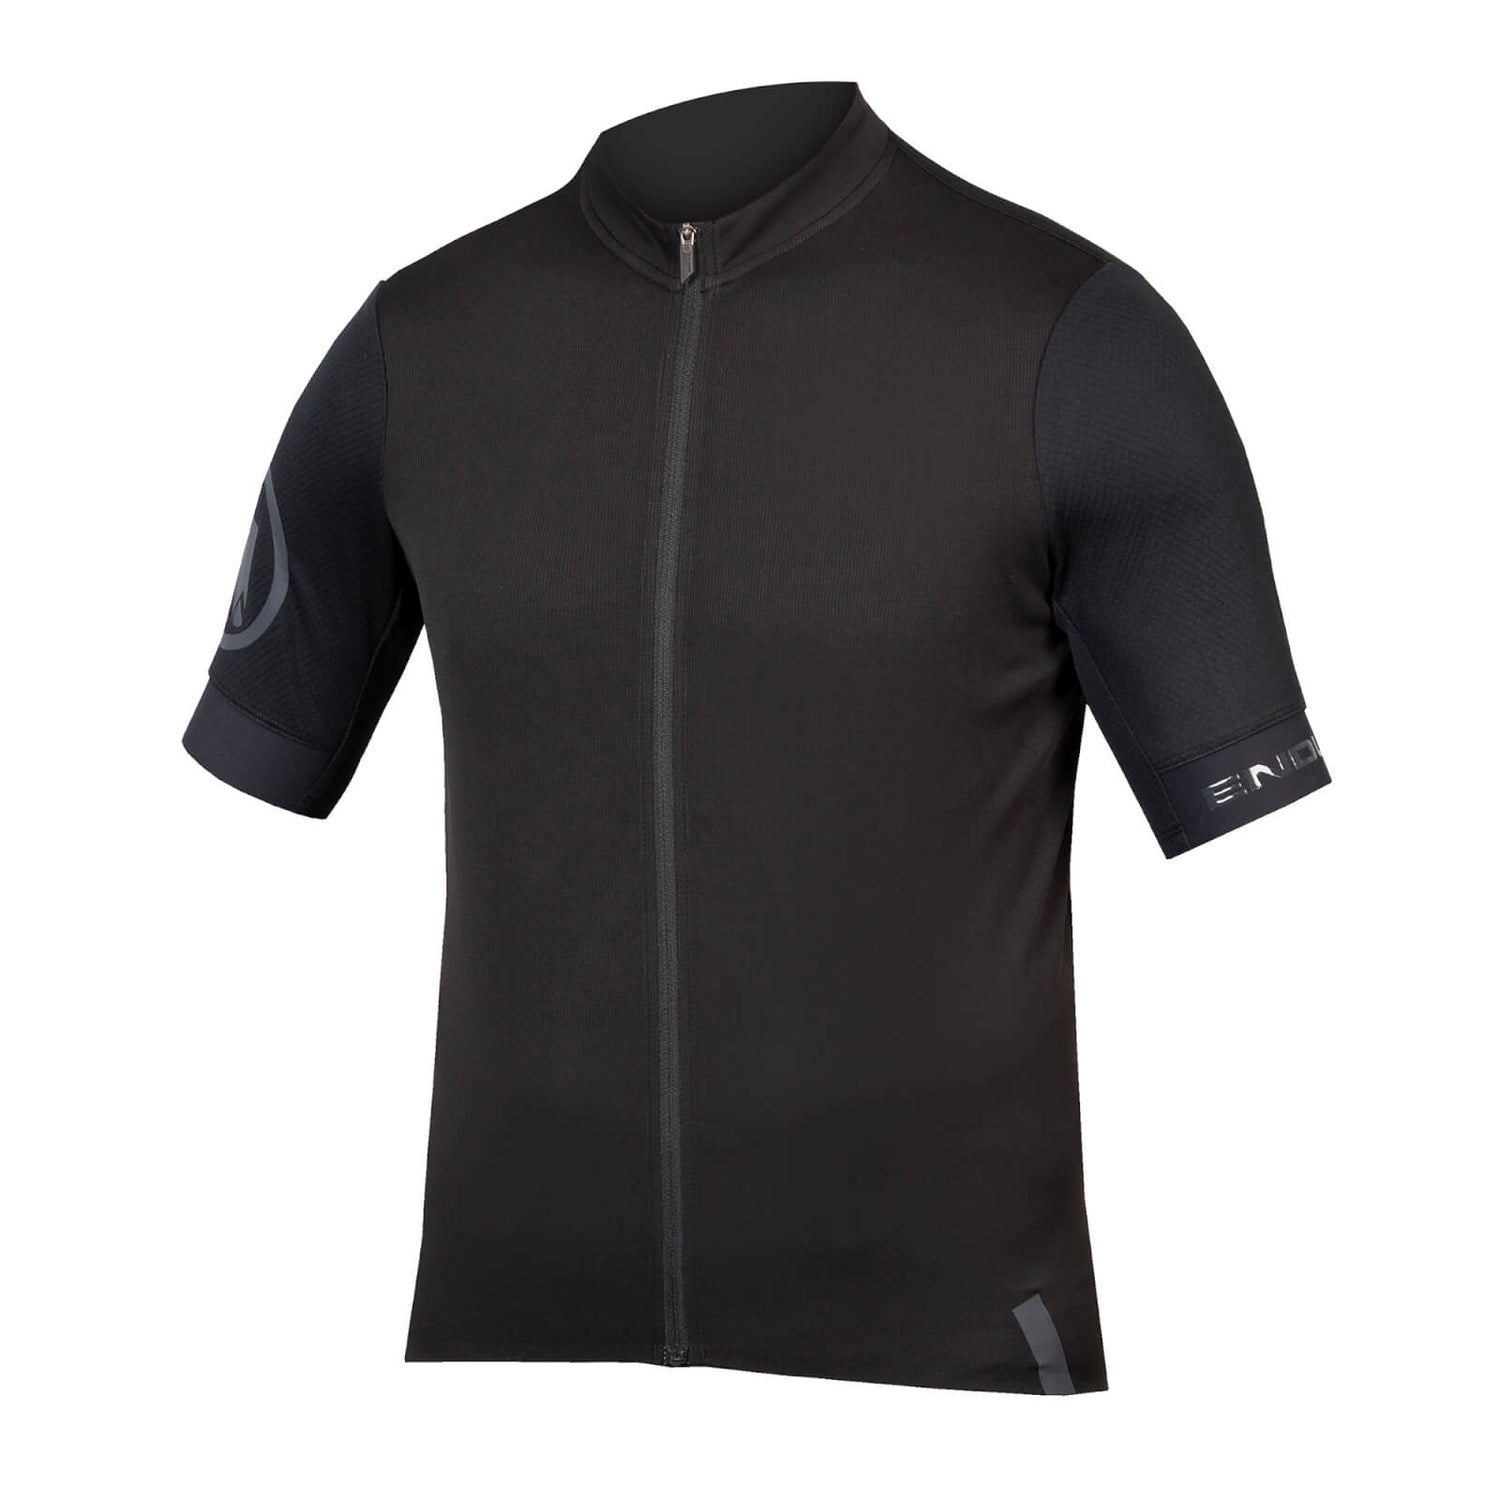 Men's FS260 S/S Jersey - Black - XXL (Relaxed Fit)